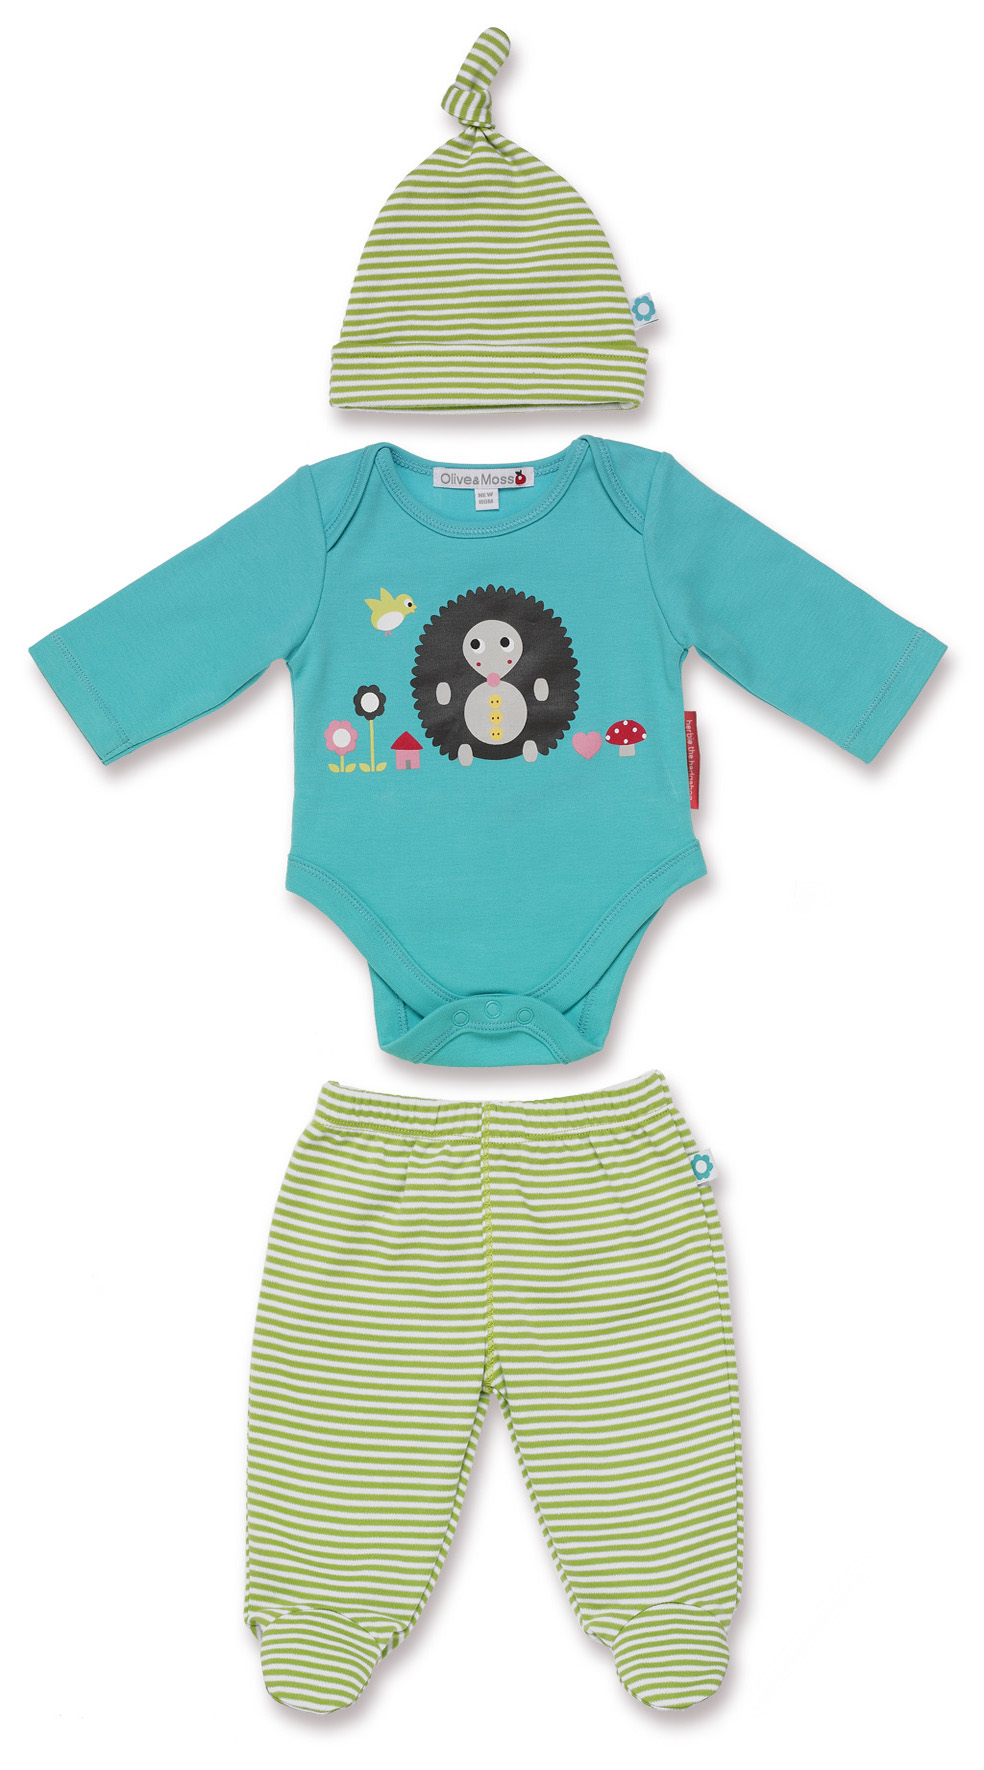 Cute Baby Clothes from Olive & Moss - The Fashionable Bambino